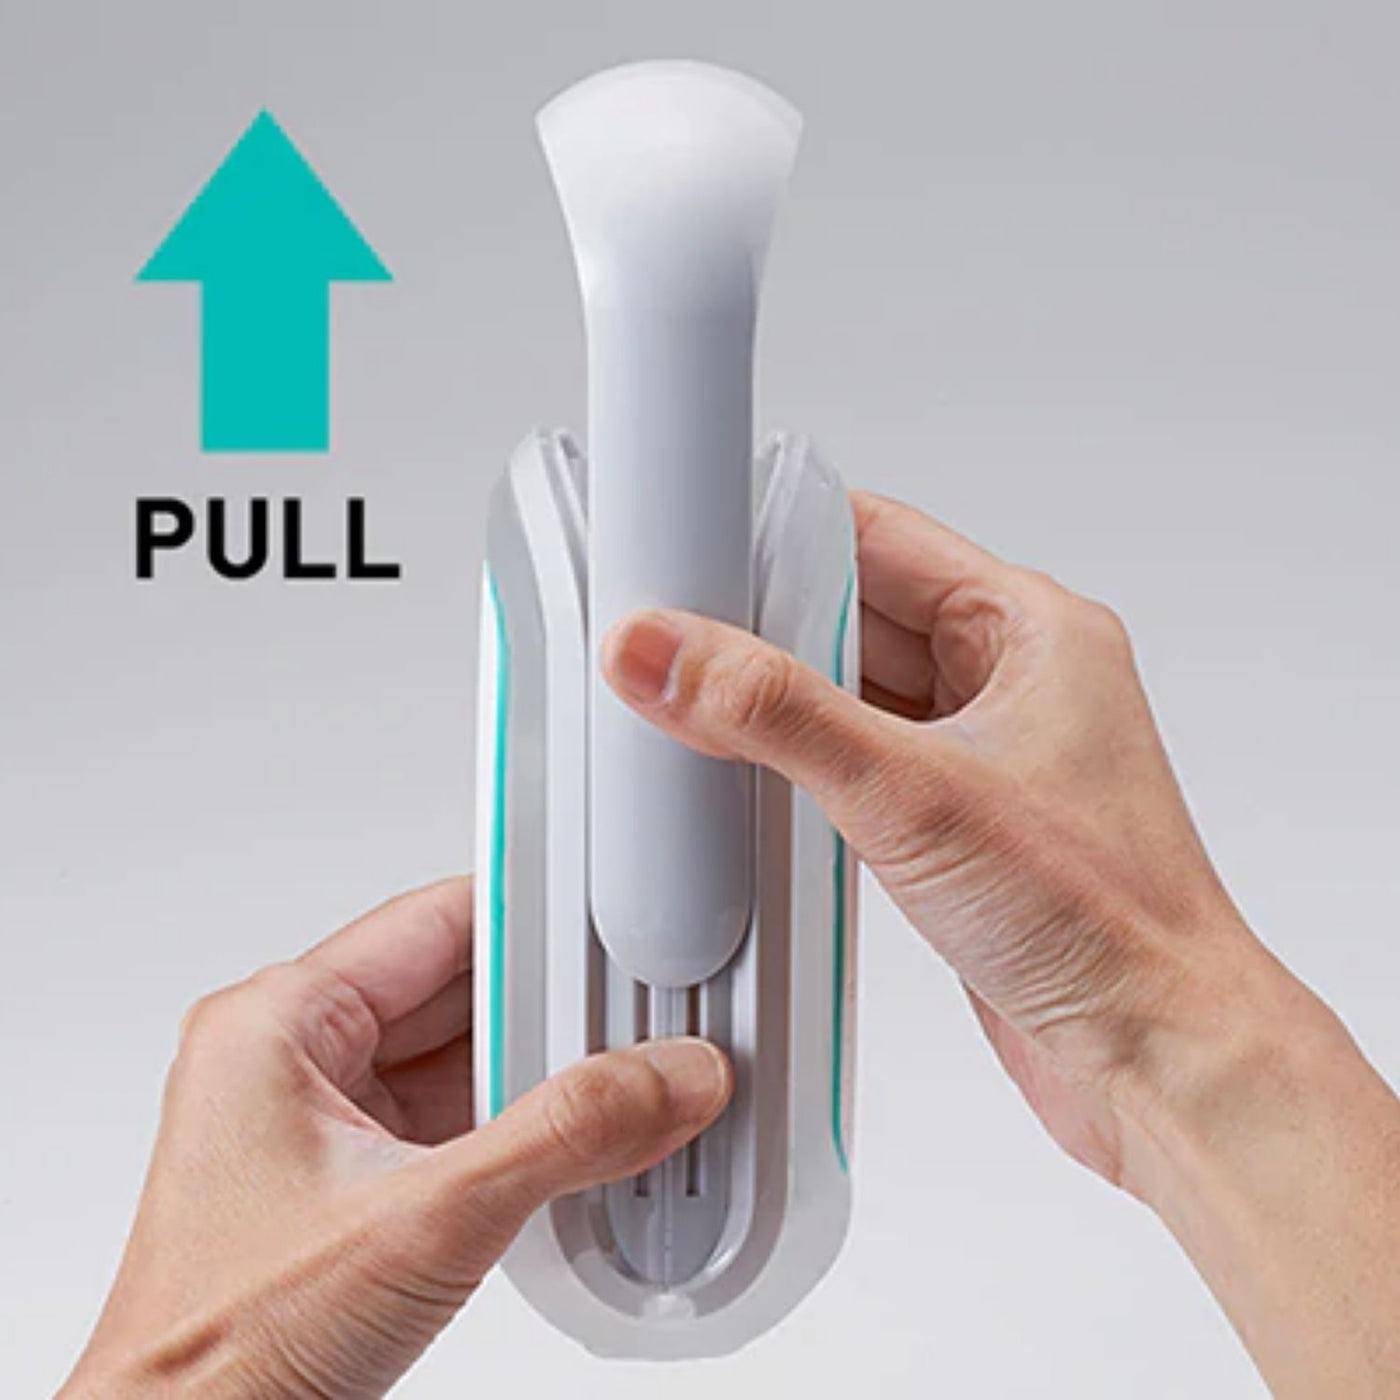 Tenga Timing Trainer Keep Masturbator Set With or Without Training picture image